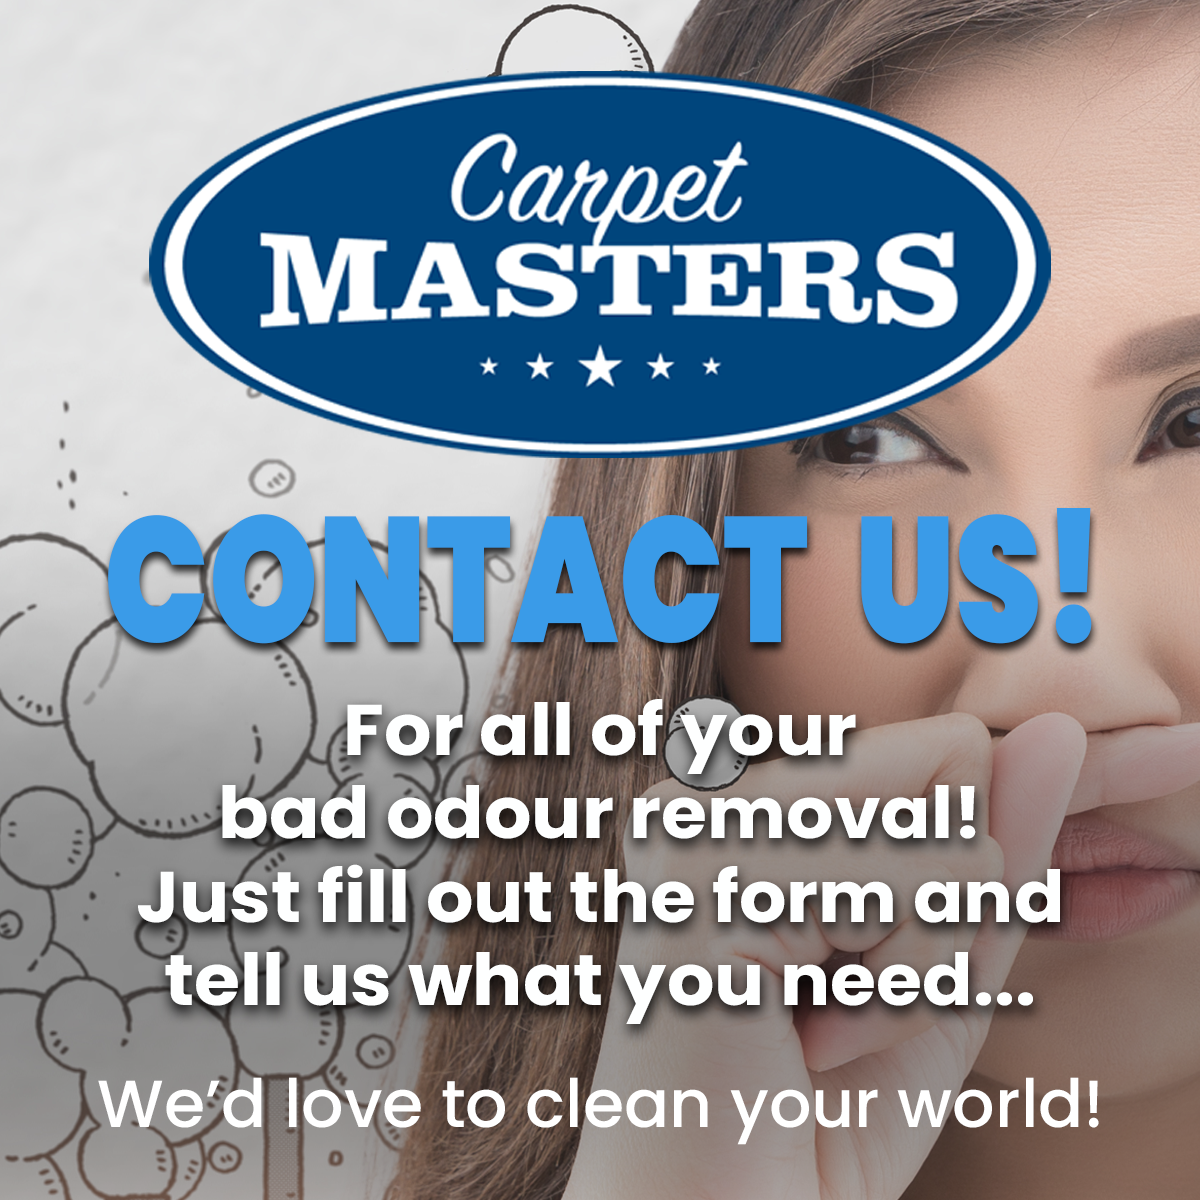 Contact Us for all of your odour removal! Just tell us what you need...